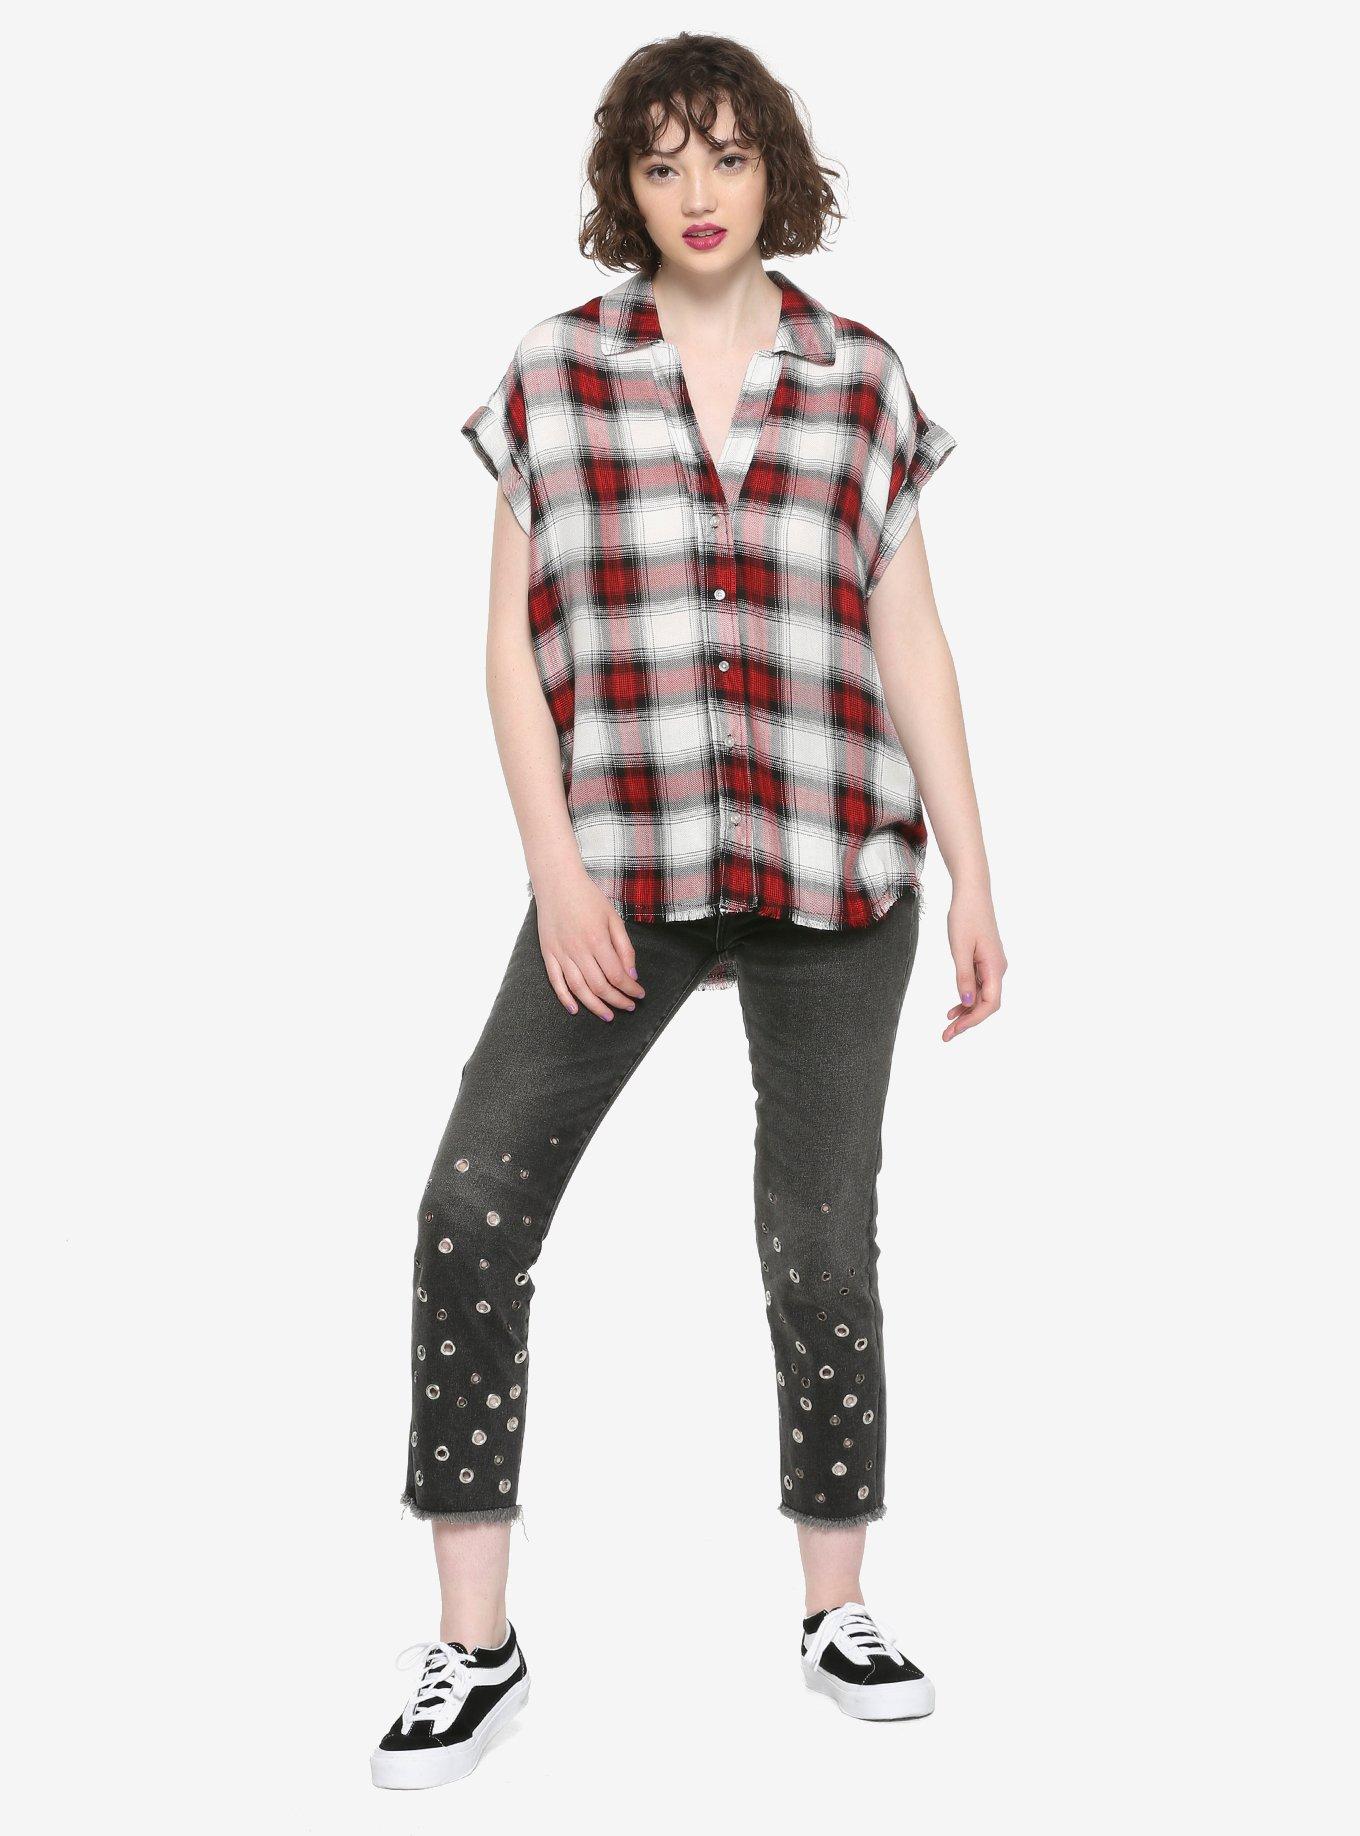 Red Black & White Plaid Girls Button-Up Woven Top, PLAID, alternate